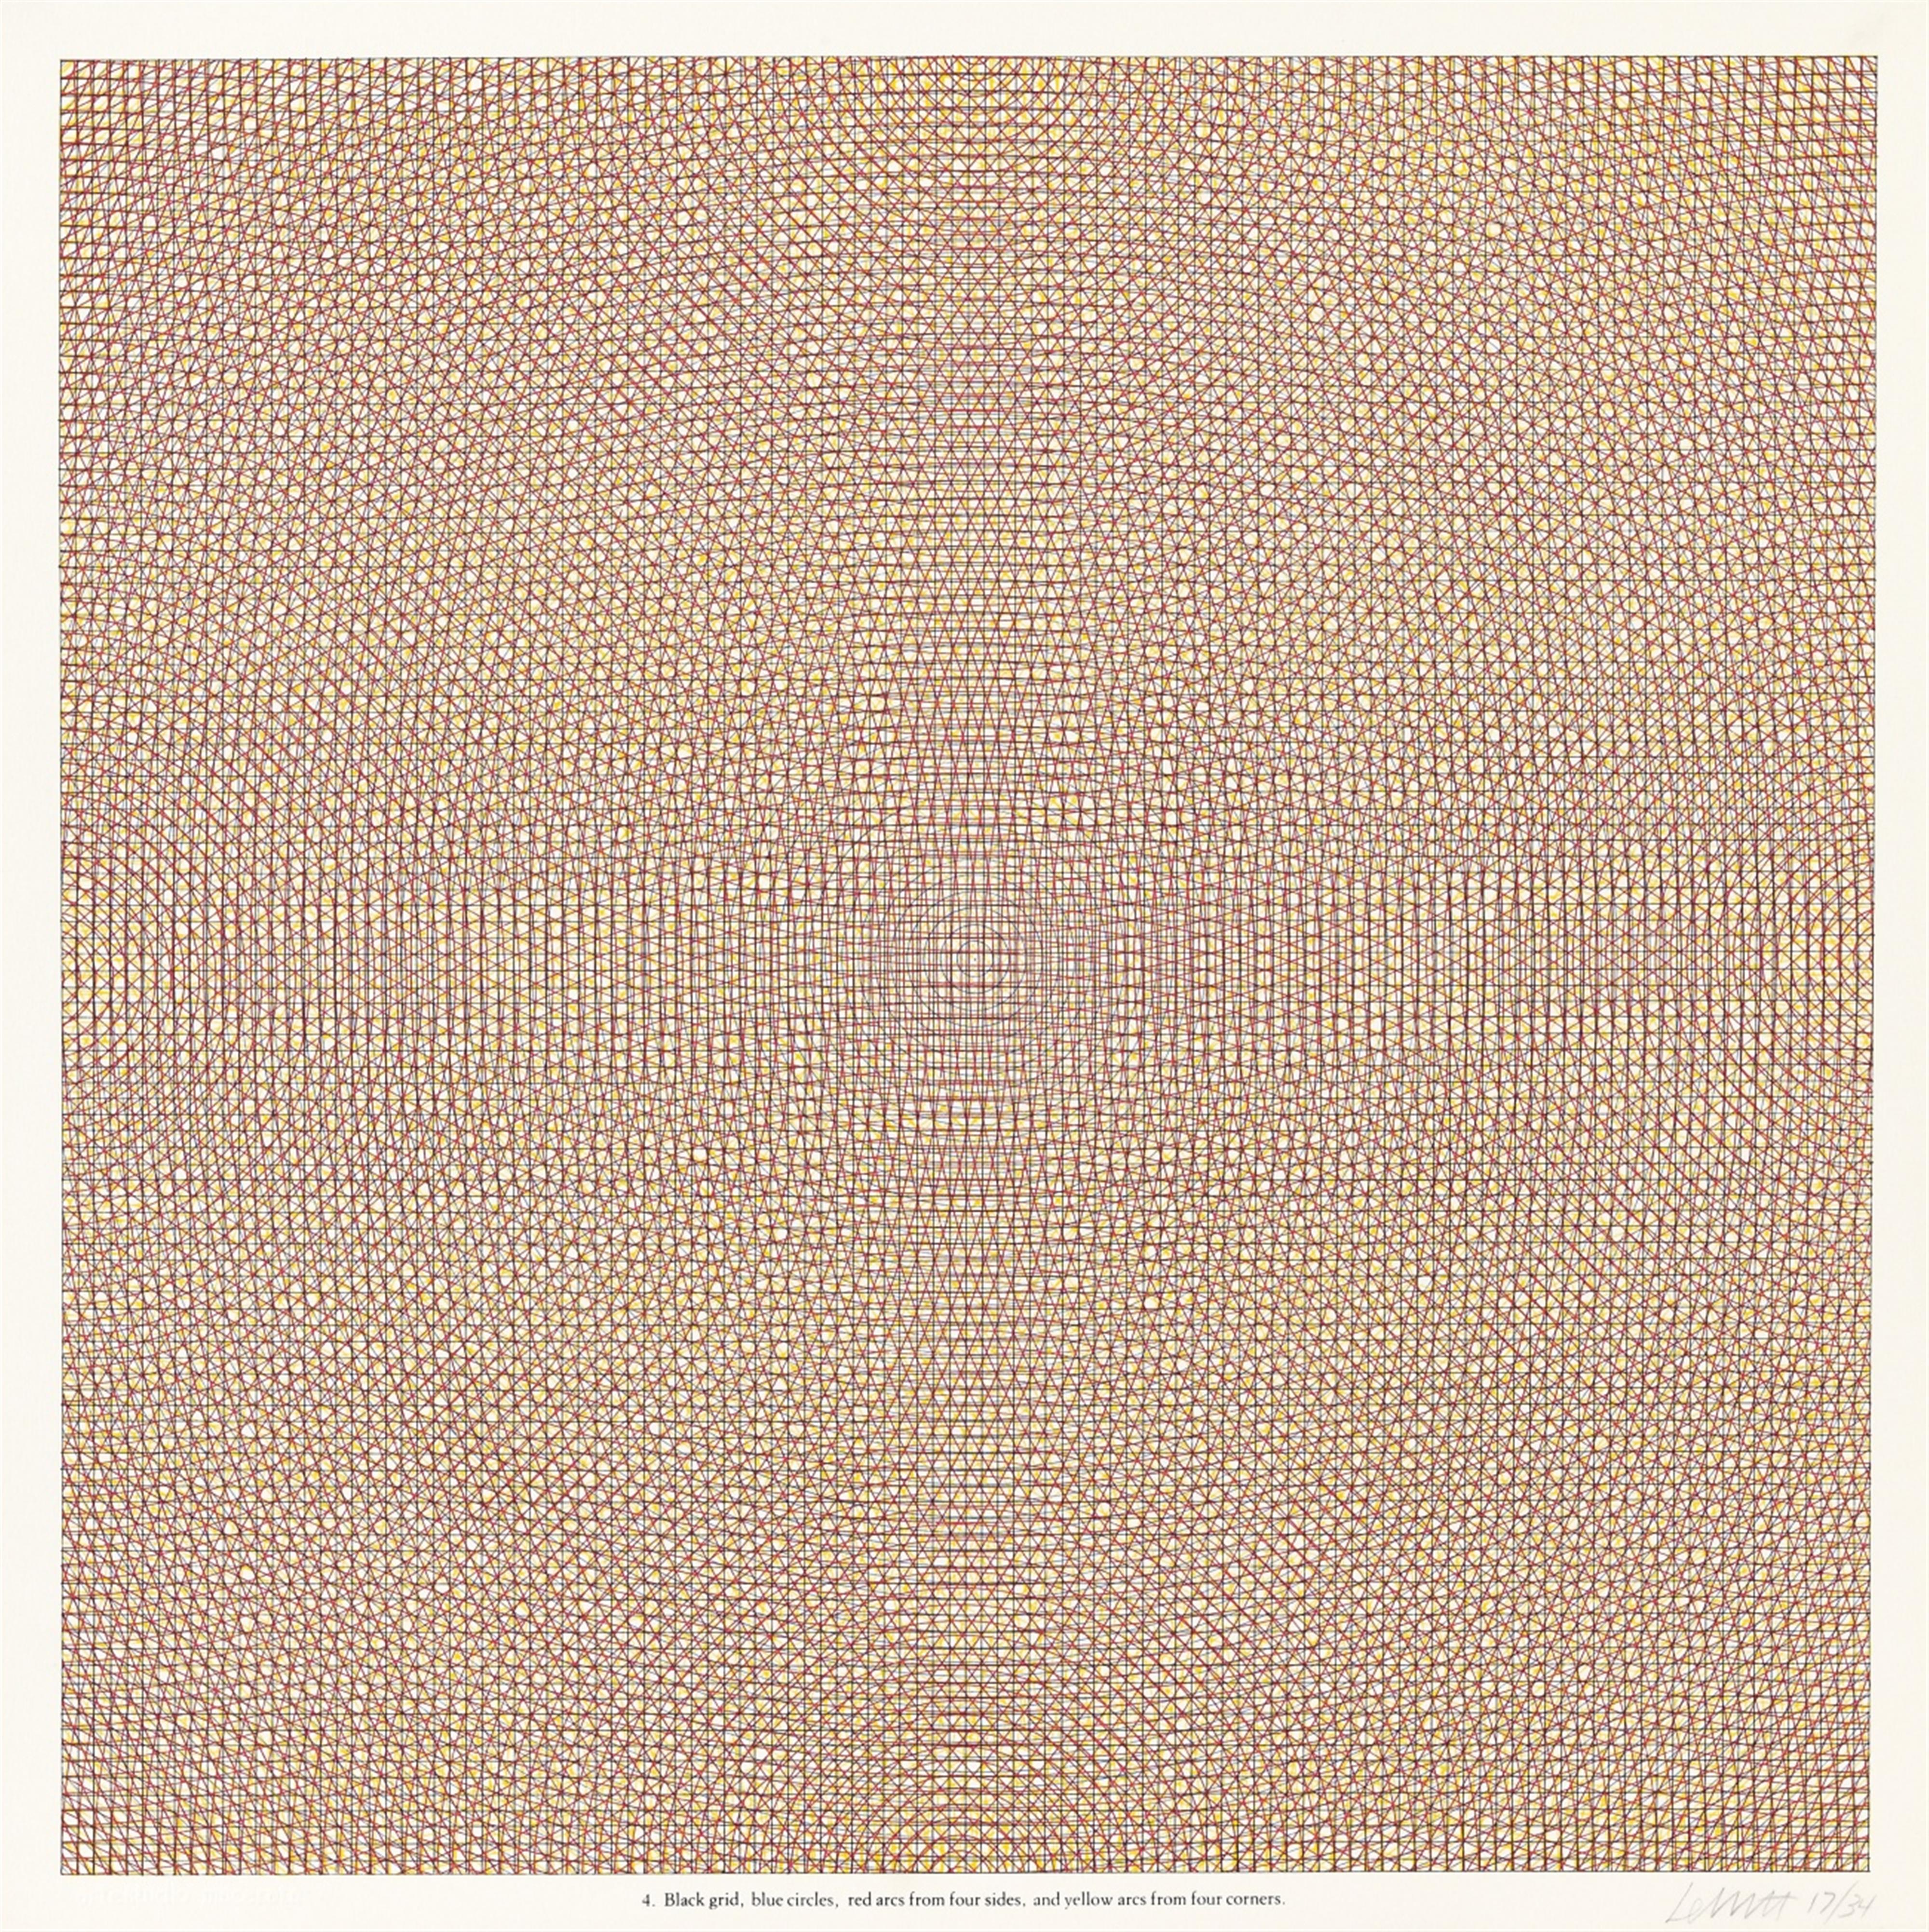 Sol LeWitt - All combinations of arcs from sides & corners, grinds and circles - image-4